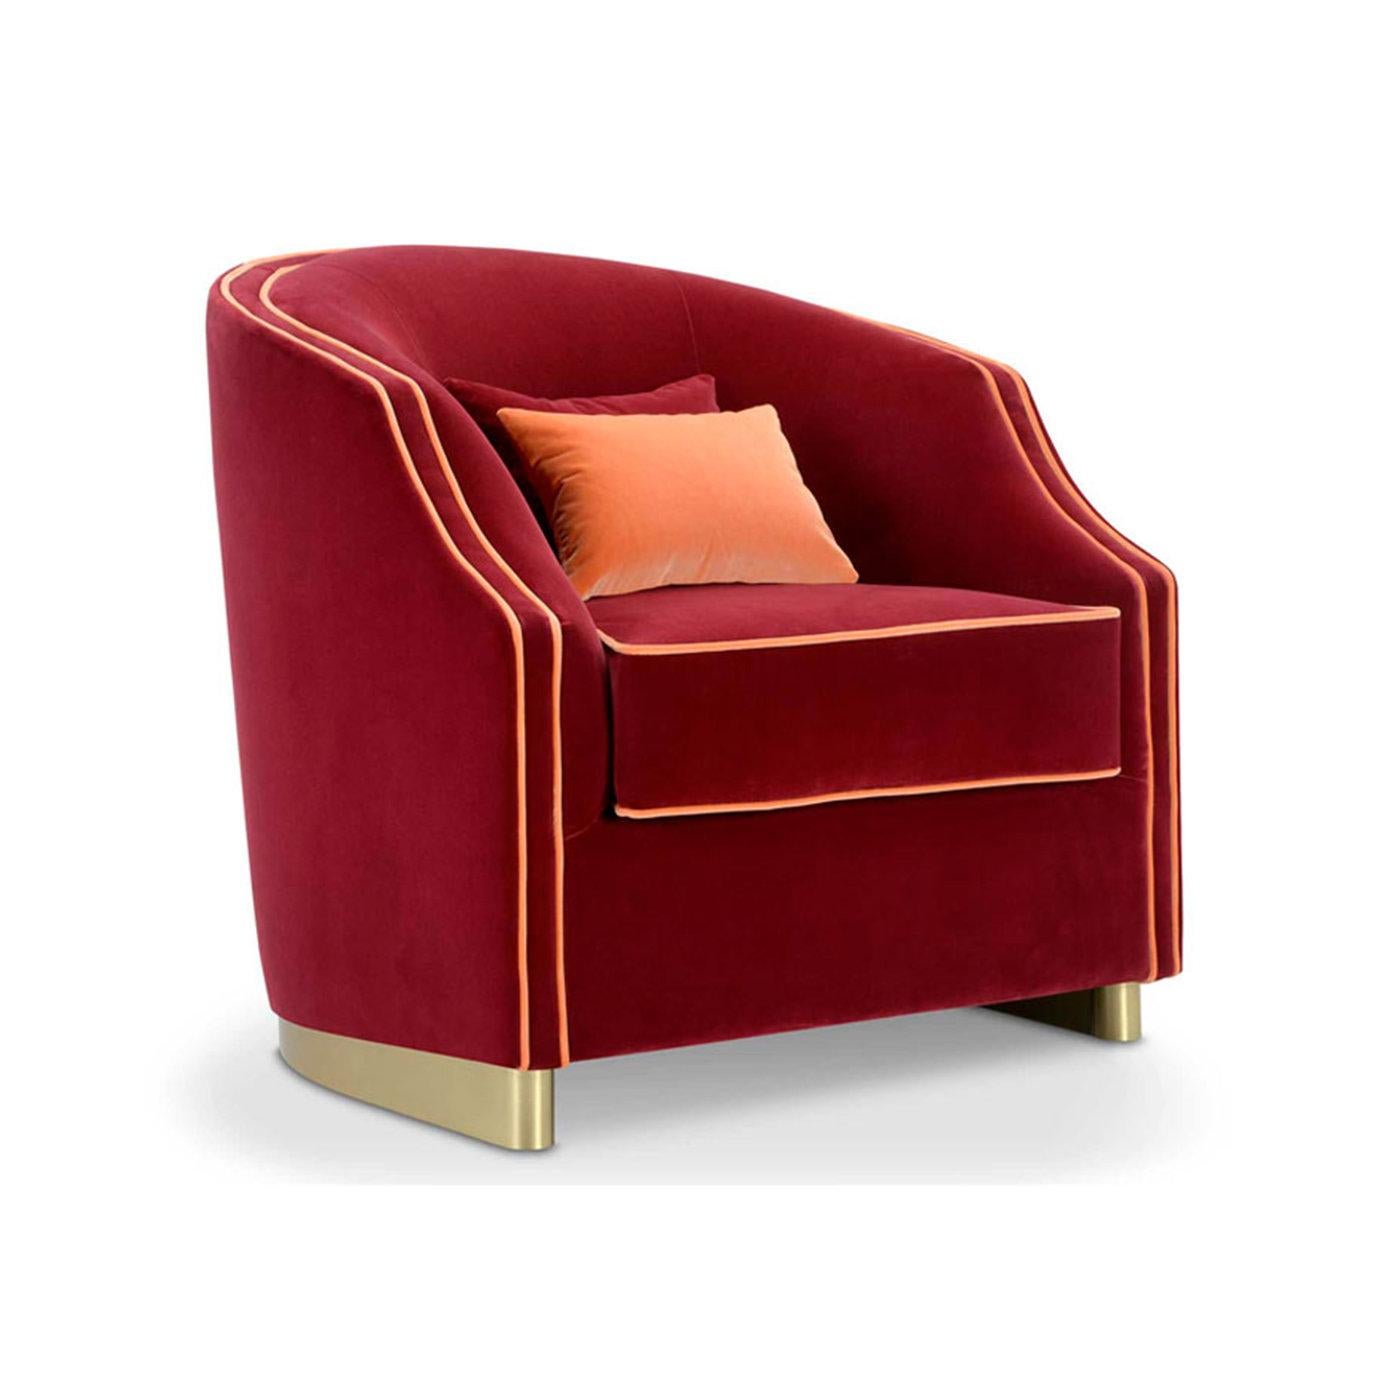 The perfect accent piece complement classic decors, this regal armchair enchants with its burgundy velvet upholstery and contrasting light hems that accent the flowing silhouette. The smooth structure forming the enveloping backrest frames the plush